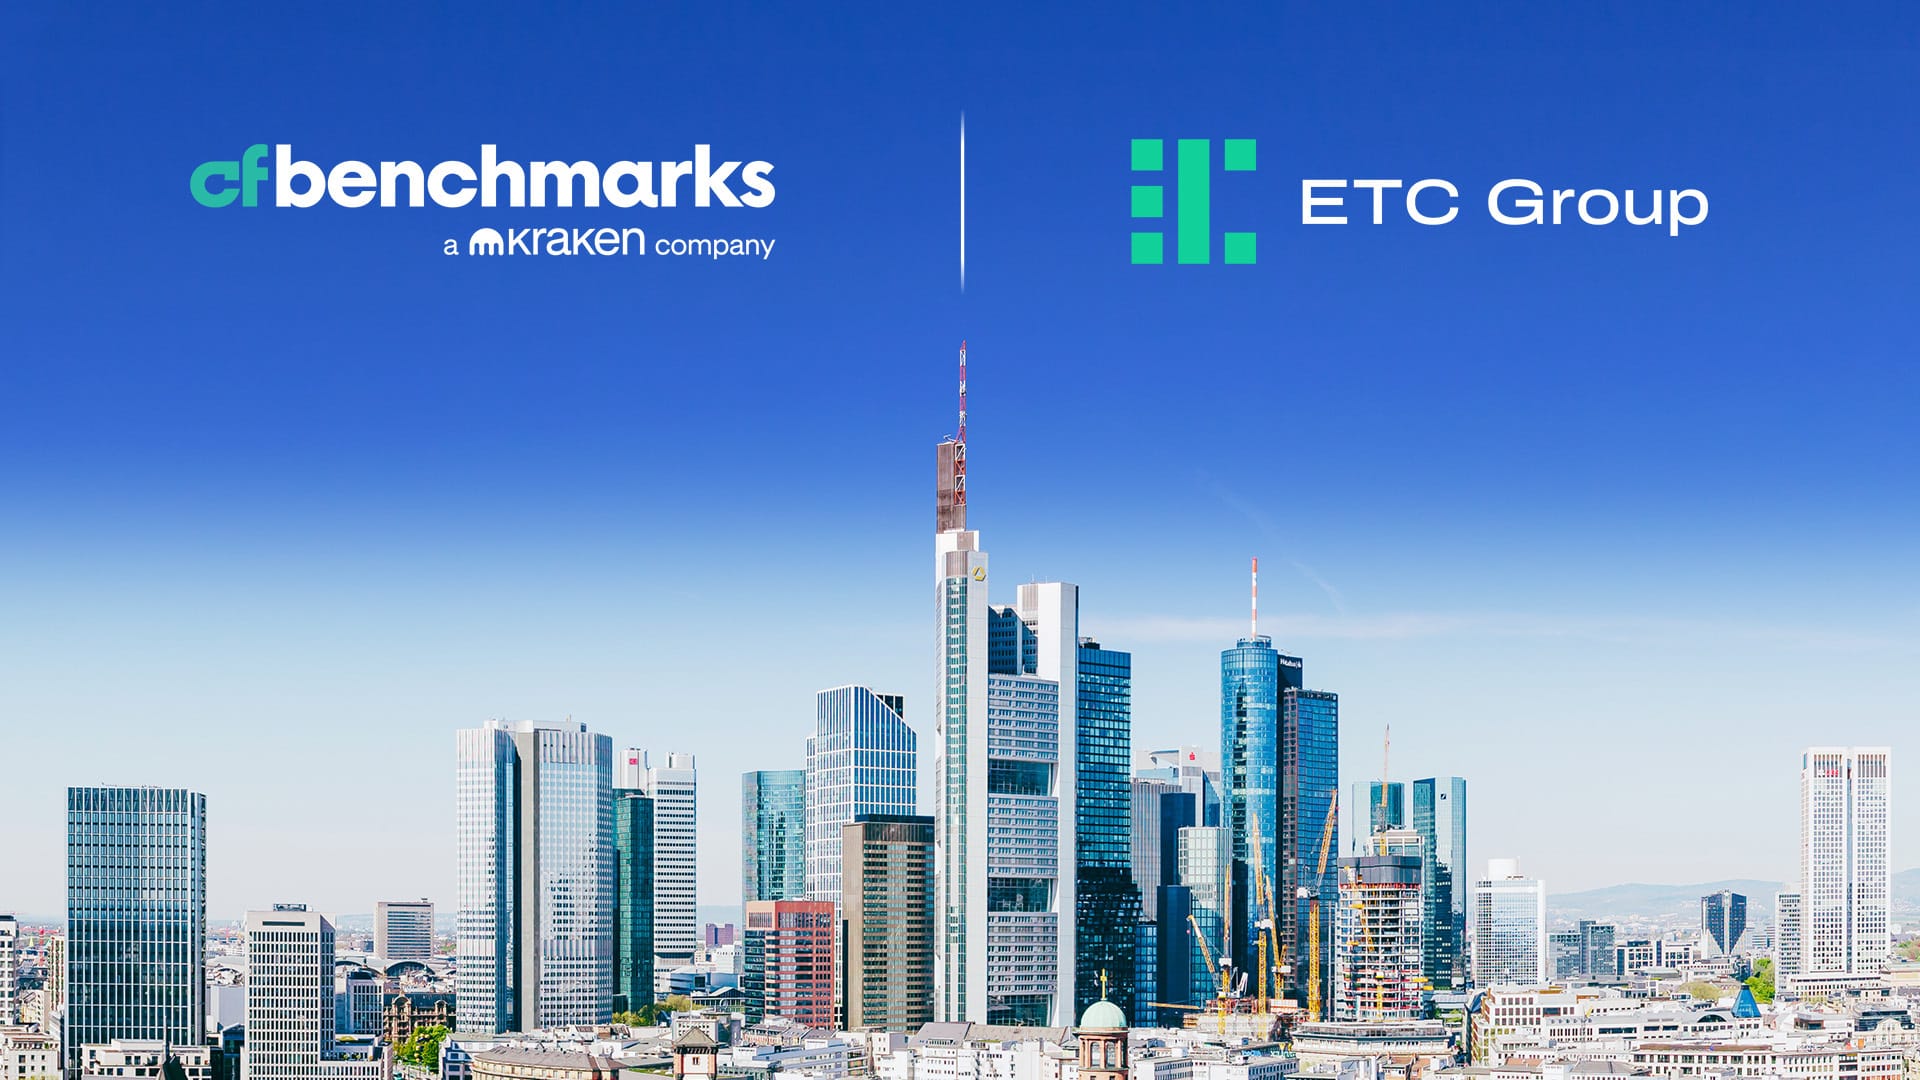 ETC Group’s unique ‘Tri-NAV’ ETP is underpinned by CF Benchmarks’ regulated Bitcoin Methodology